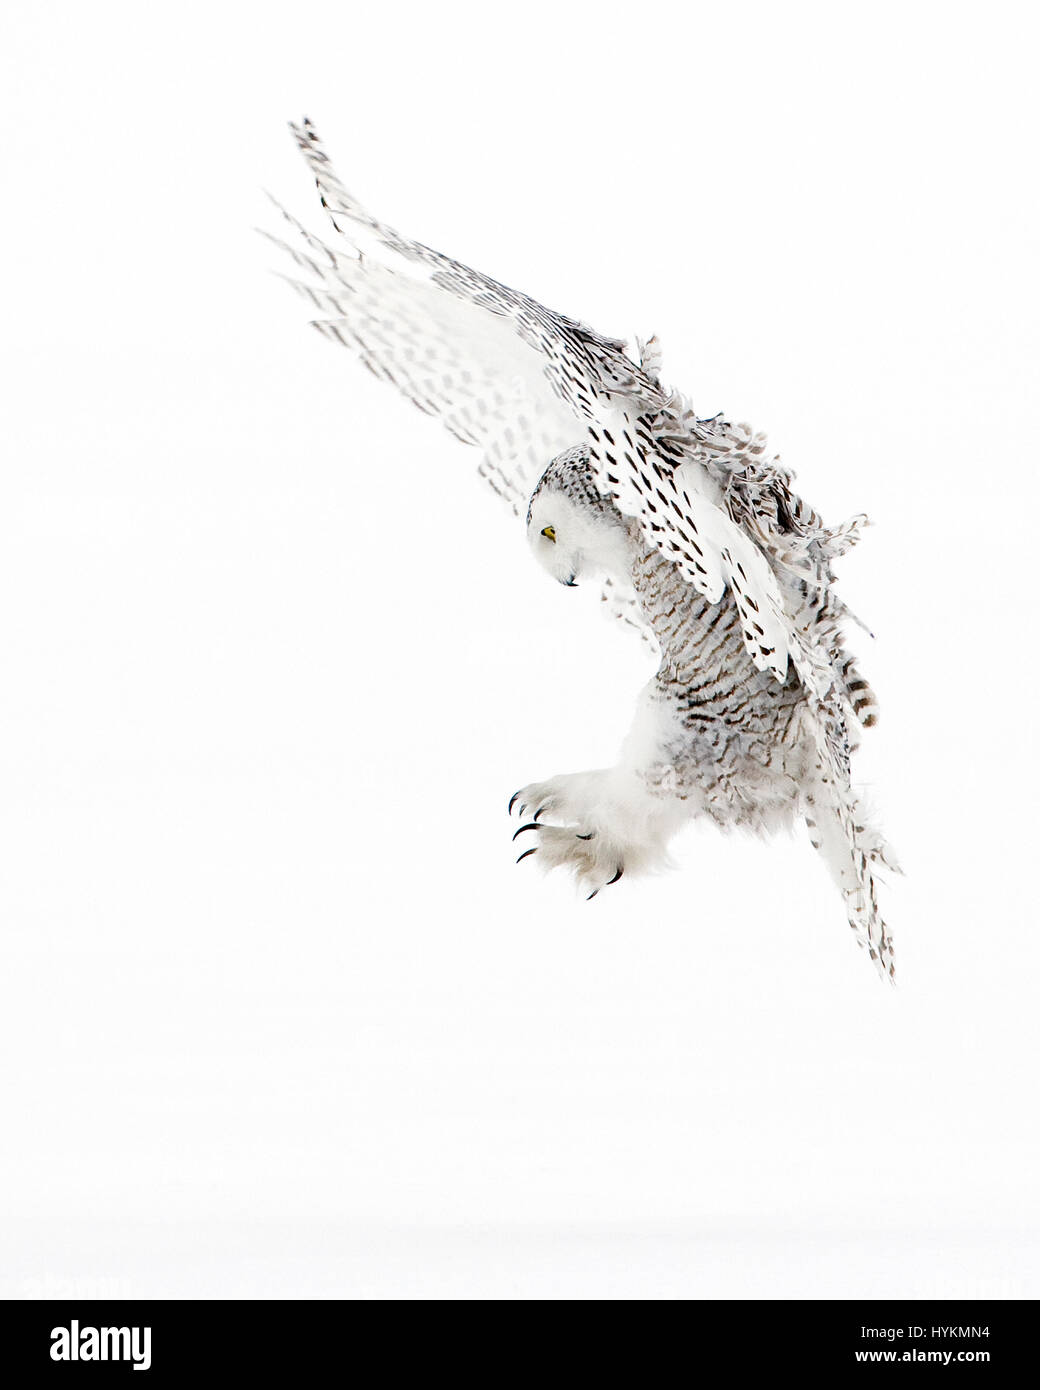 QUEBEC, CANADA: AN UNSUSPECTING mouse has fallen victim to a silent but deadly snowy owl assassin. Incredible pictures show the moment the snow owl spies its prey and then swoops in for the kill leaving no trace of the hunt.  Other expertly captured pictures show the white and black feathered flyer engaged in a battle with a rival and killing time out on the snow-covered field. Canadian wildlife enthusiast Marc Latremouille (47) was able to photograph this majestic predator in Quebec, Canada using his experience in leading photography workshops. Stock Photo